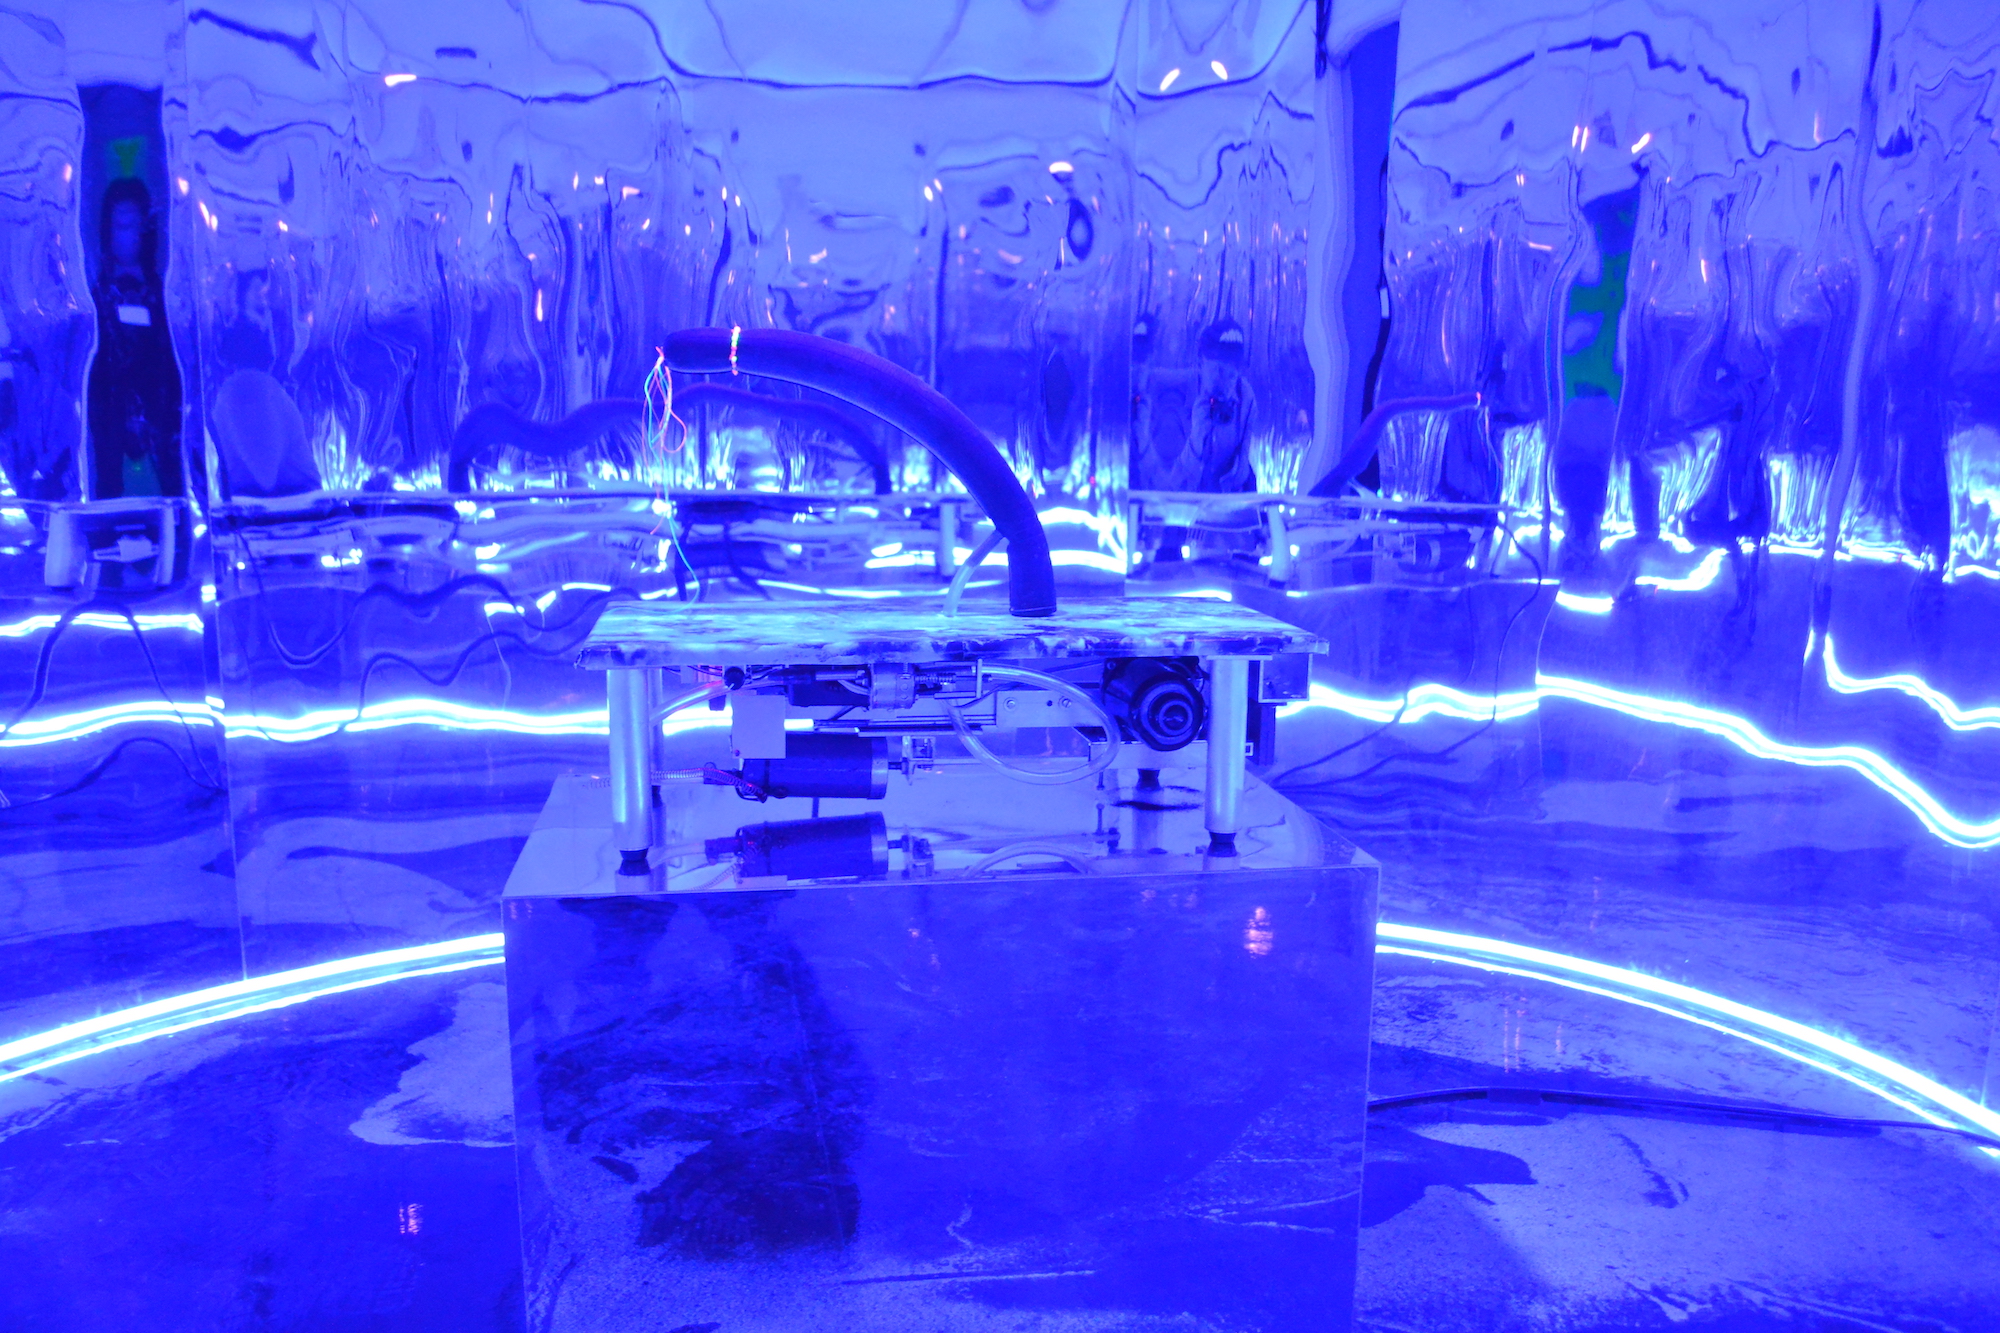 A mirror room illuminated by blue light and filled with metal contraptions.